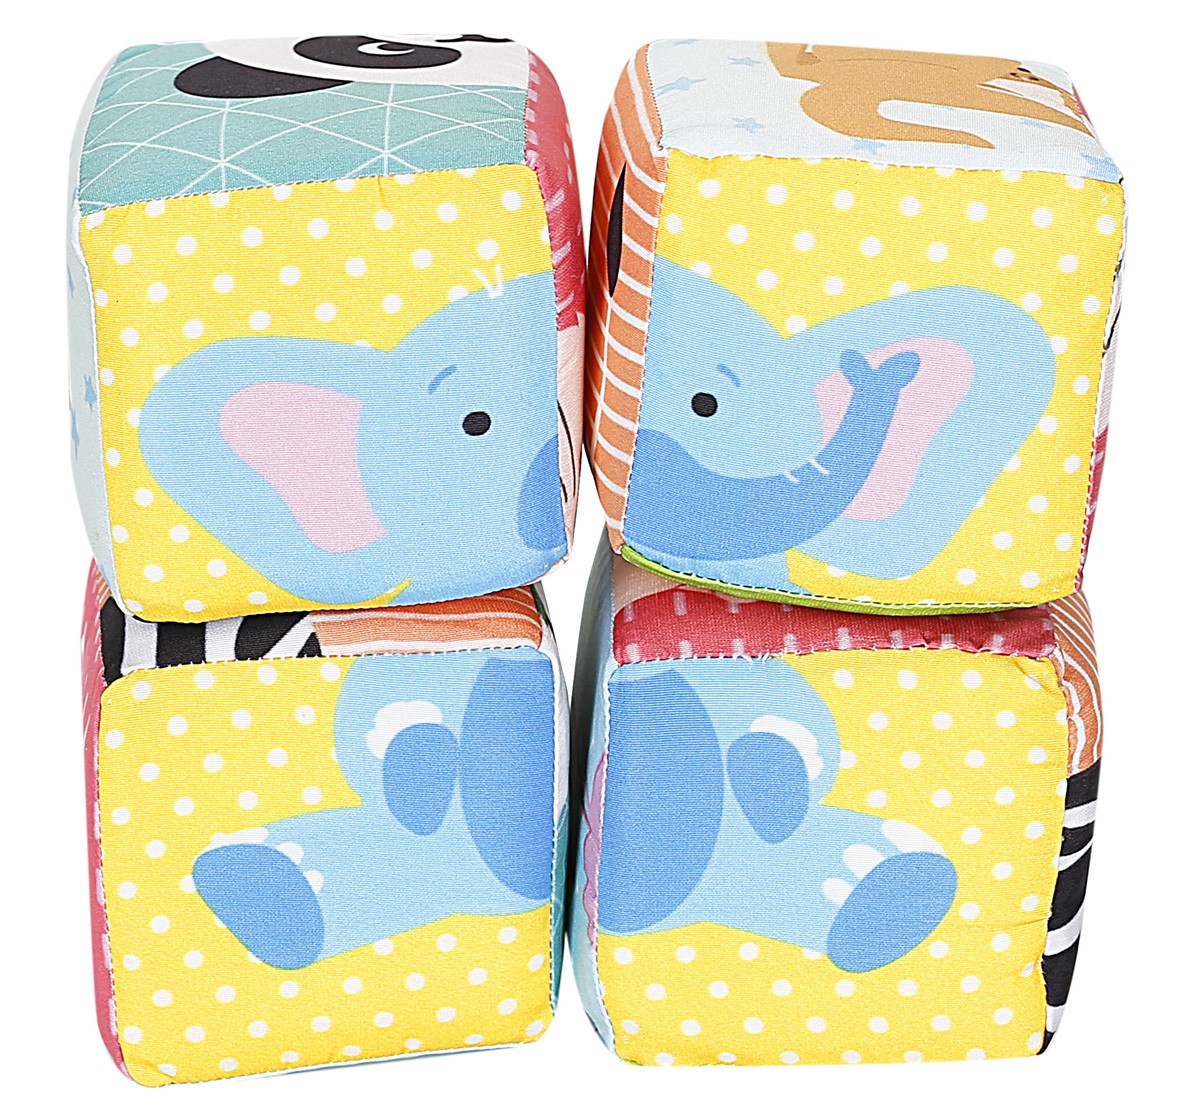 Shooting Star Animals Cube Blocks for kids 3Y+, Multicolour